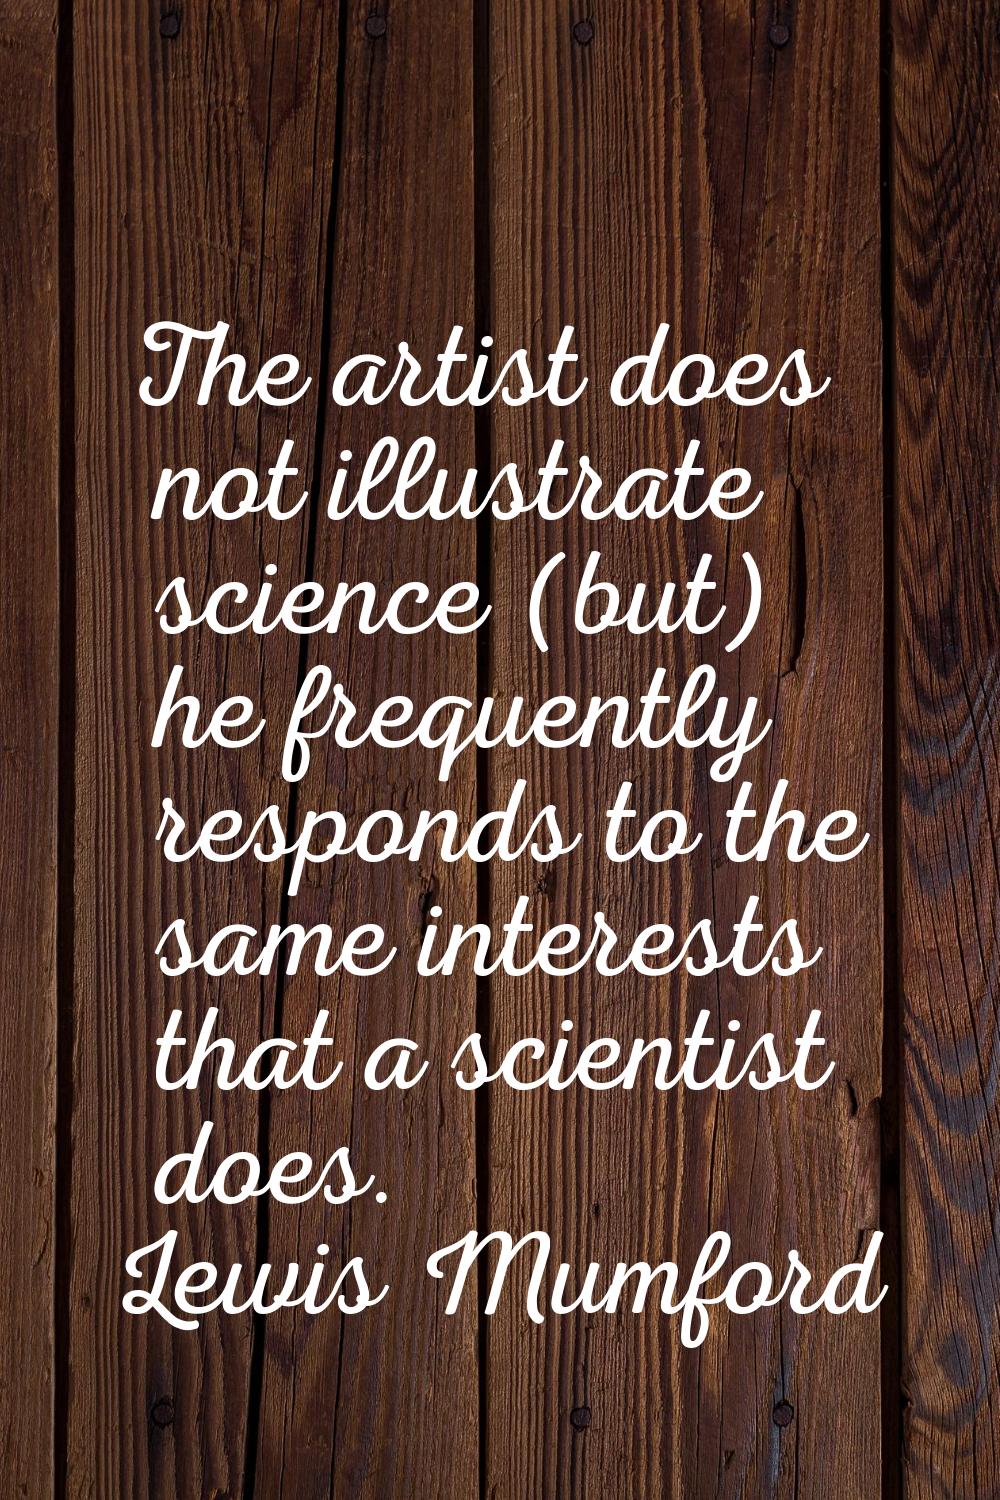 The artist does not illustrate science (but) he frequently responds to the same interests that a sc